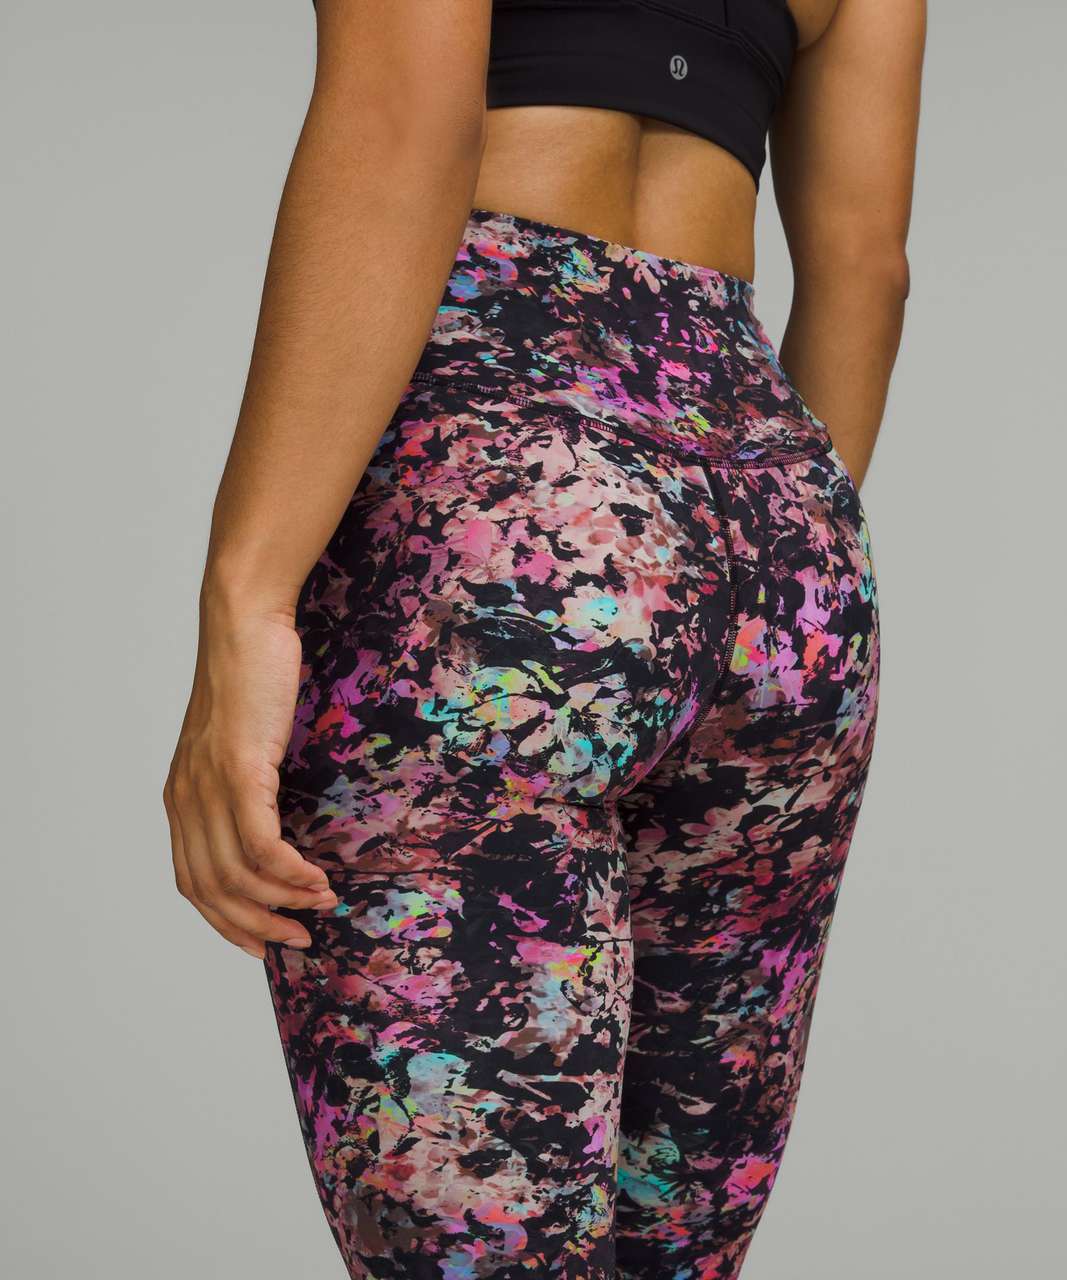 Lululemon Base Pace High-Rise Tight 25" - Stencil Blossom Red Multi